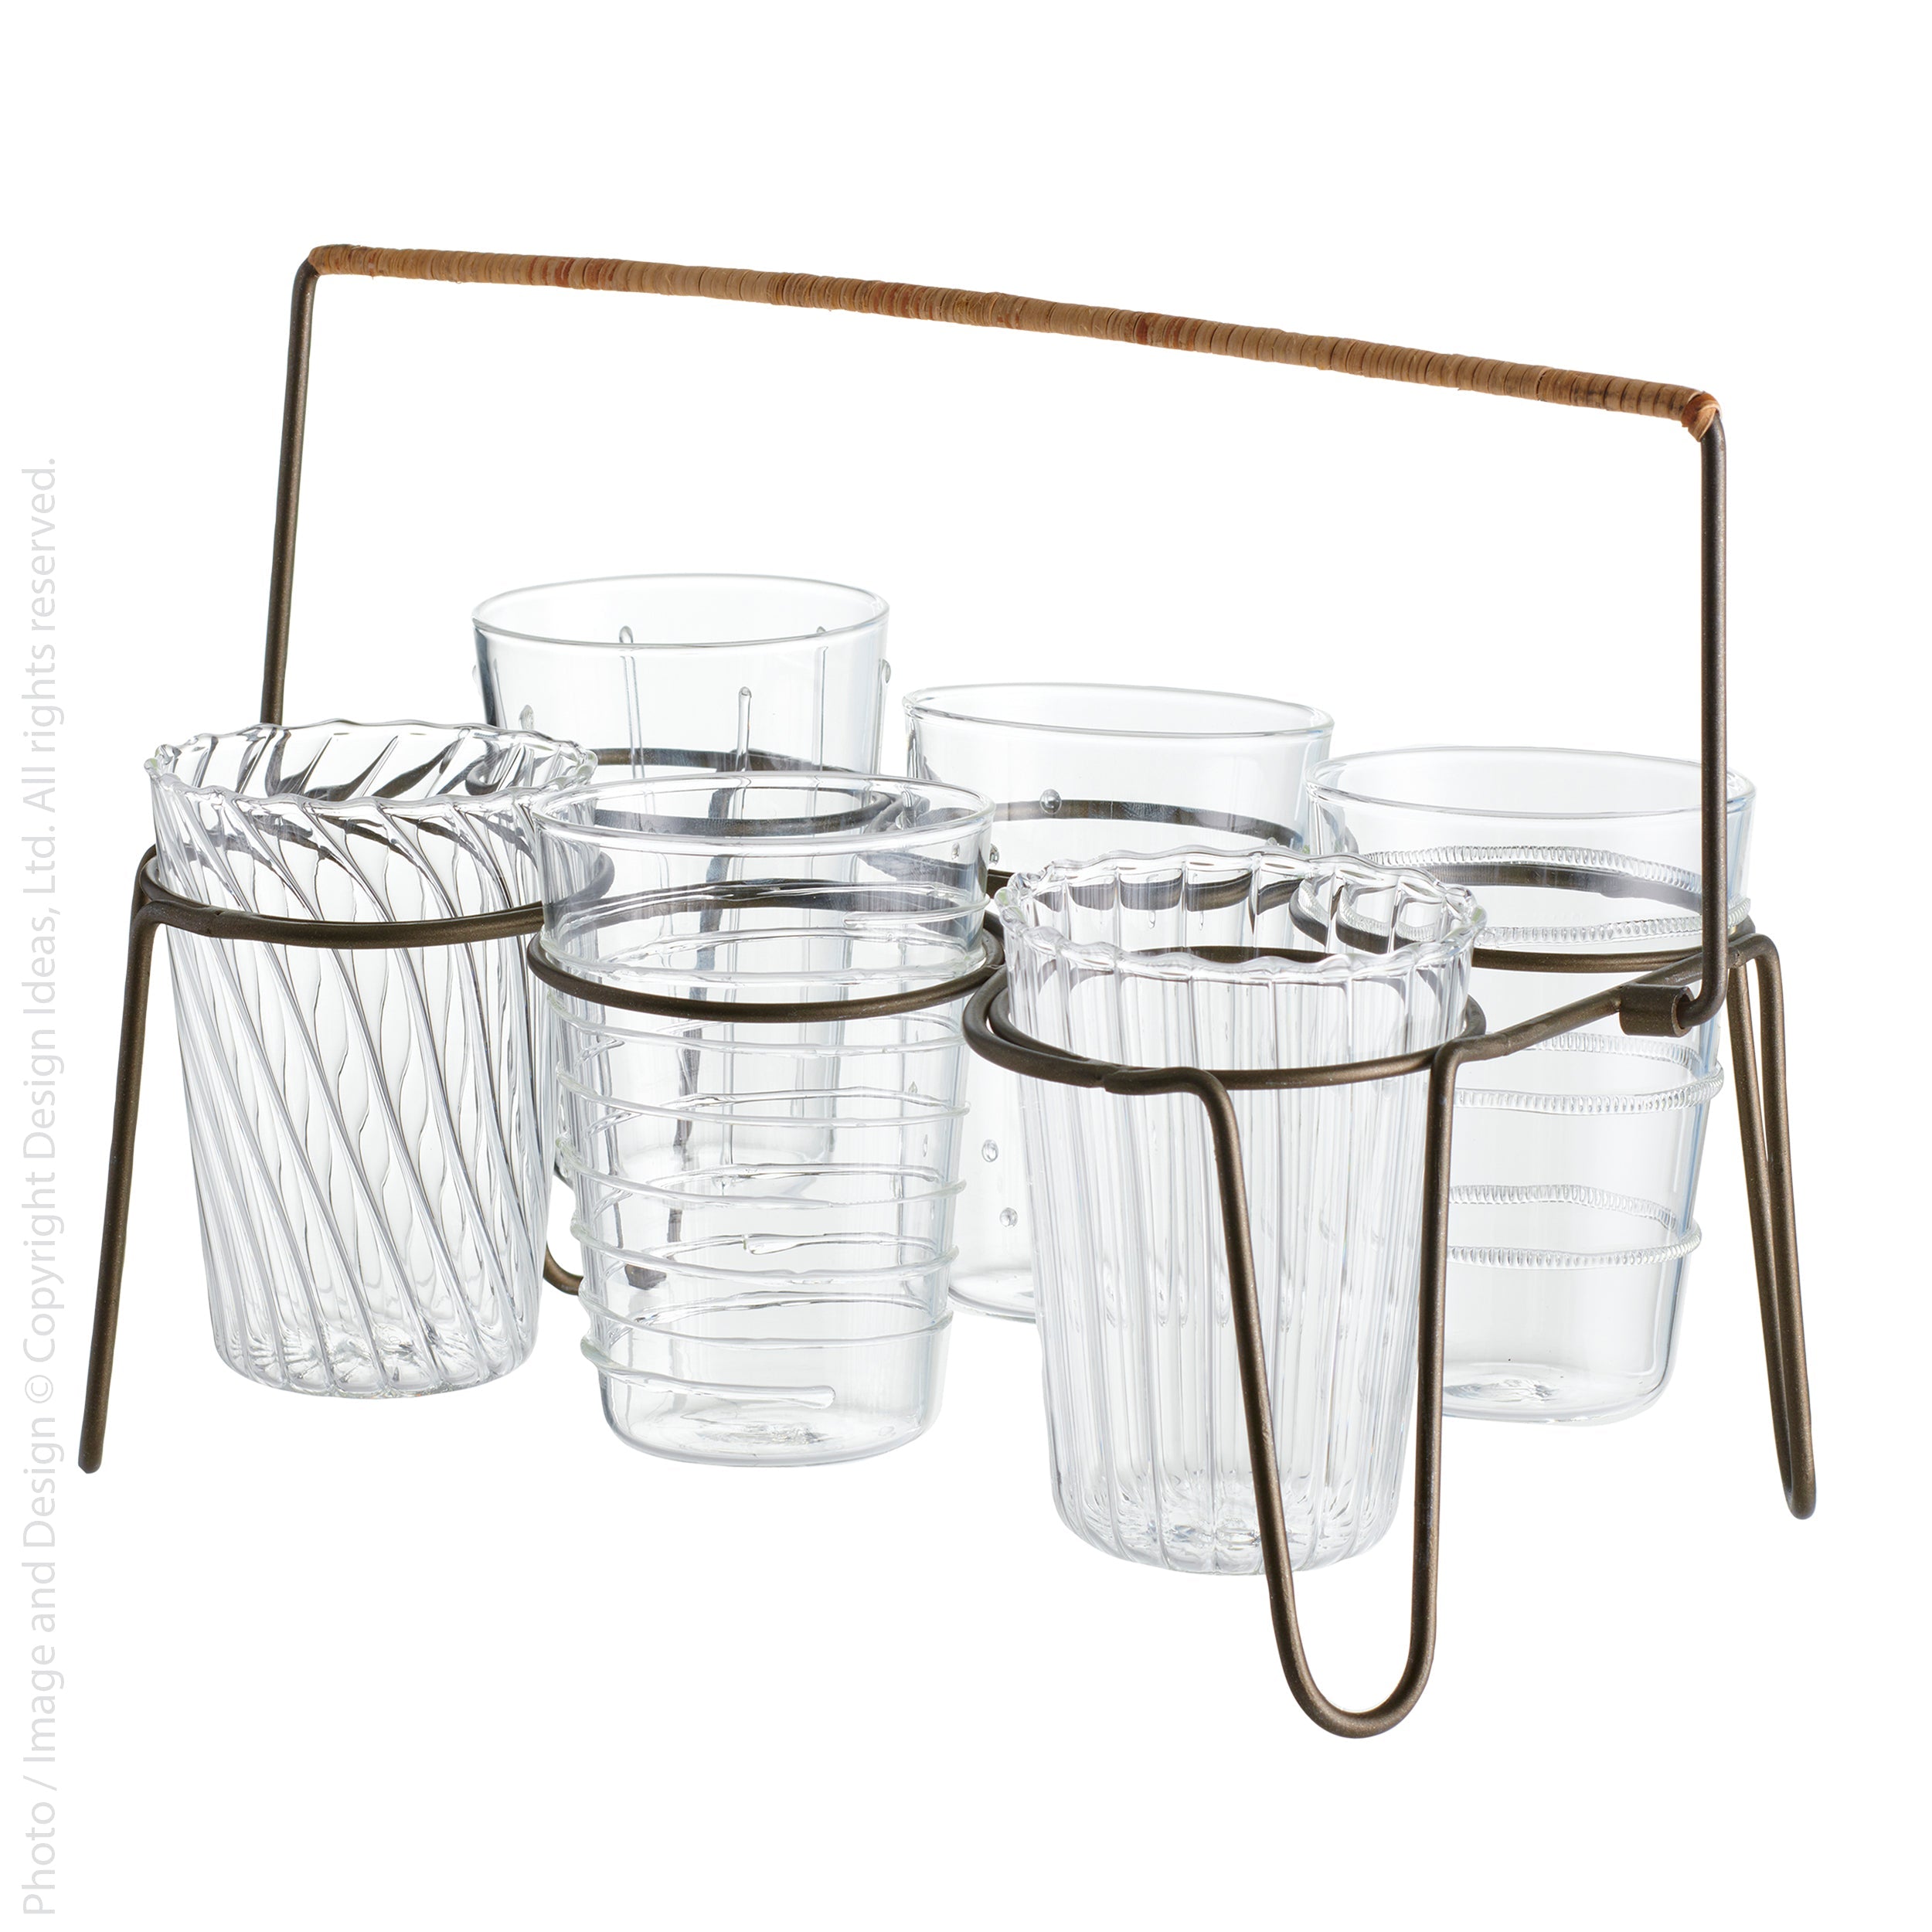 Livenza™ drink caddy - Black | Image 3 | Premium Drink Holder from the Livenza collection | made with Iron, Rattan for long lasting use | texxture